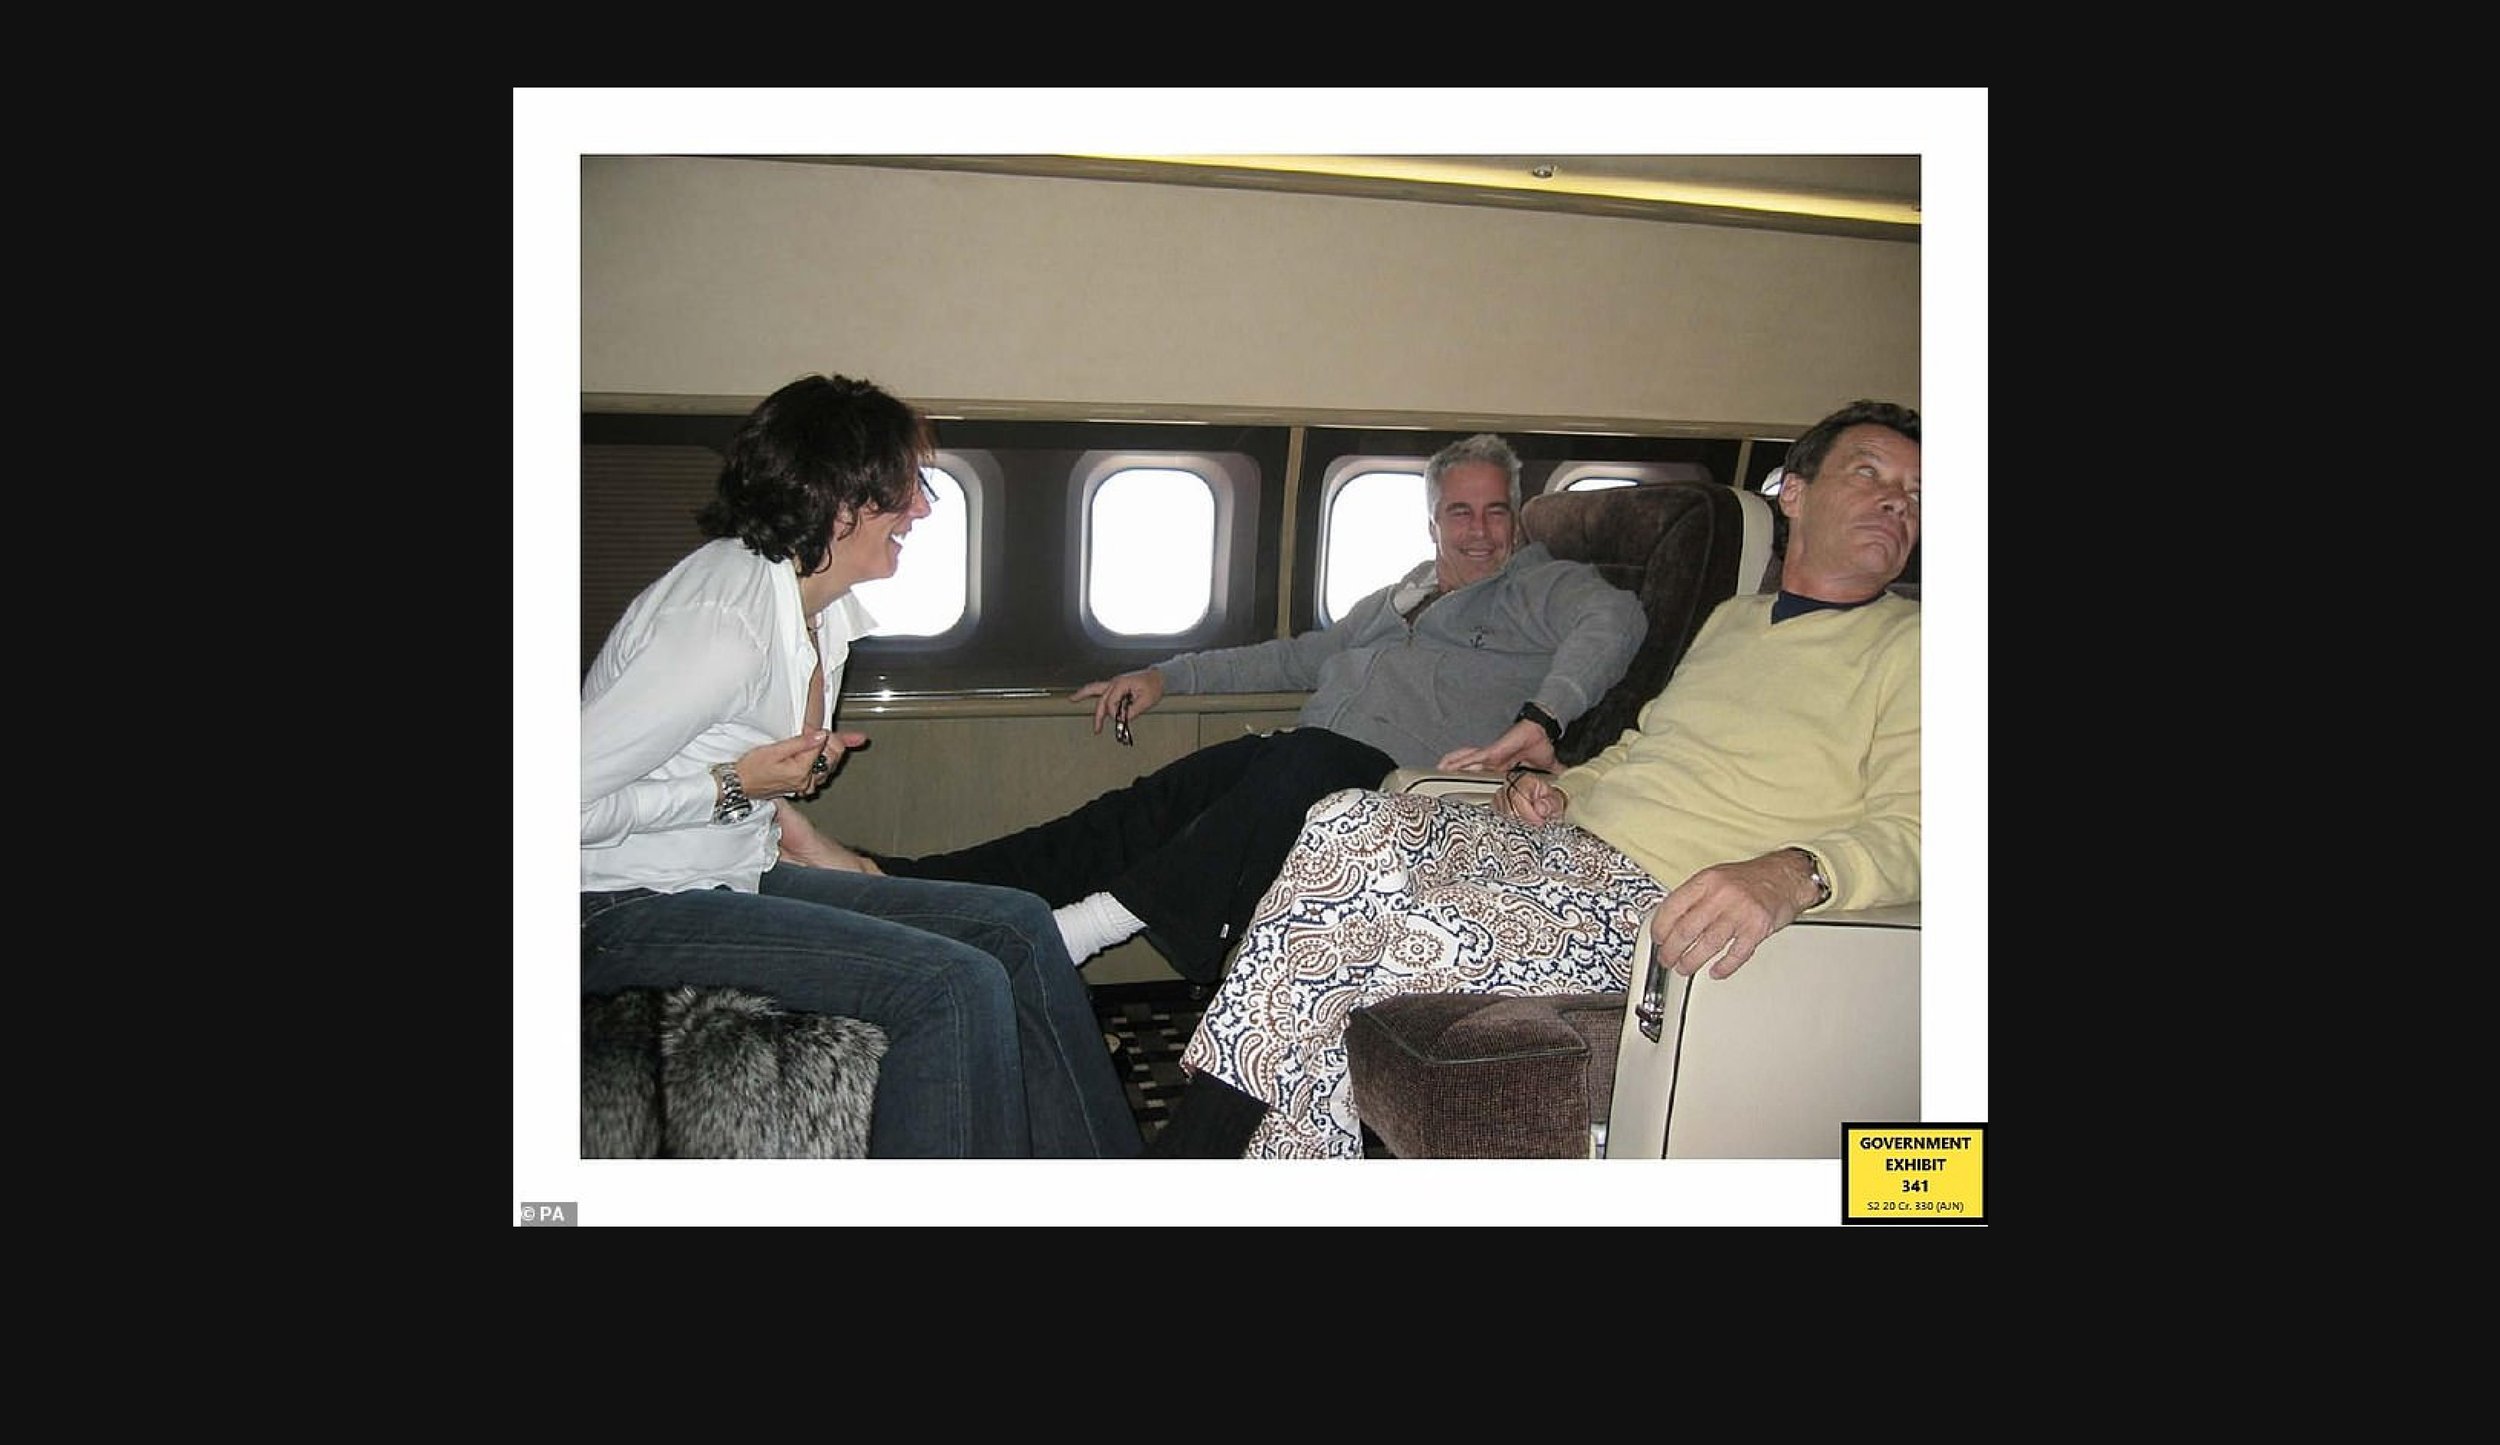  Ghislaine and Jeffrey on the “Lolita Express” with French modeling scout Jean-Luc Brunel. Brunel was charged with rape of minors by French prosecutors&nbsp;(government exhibit 341) 